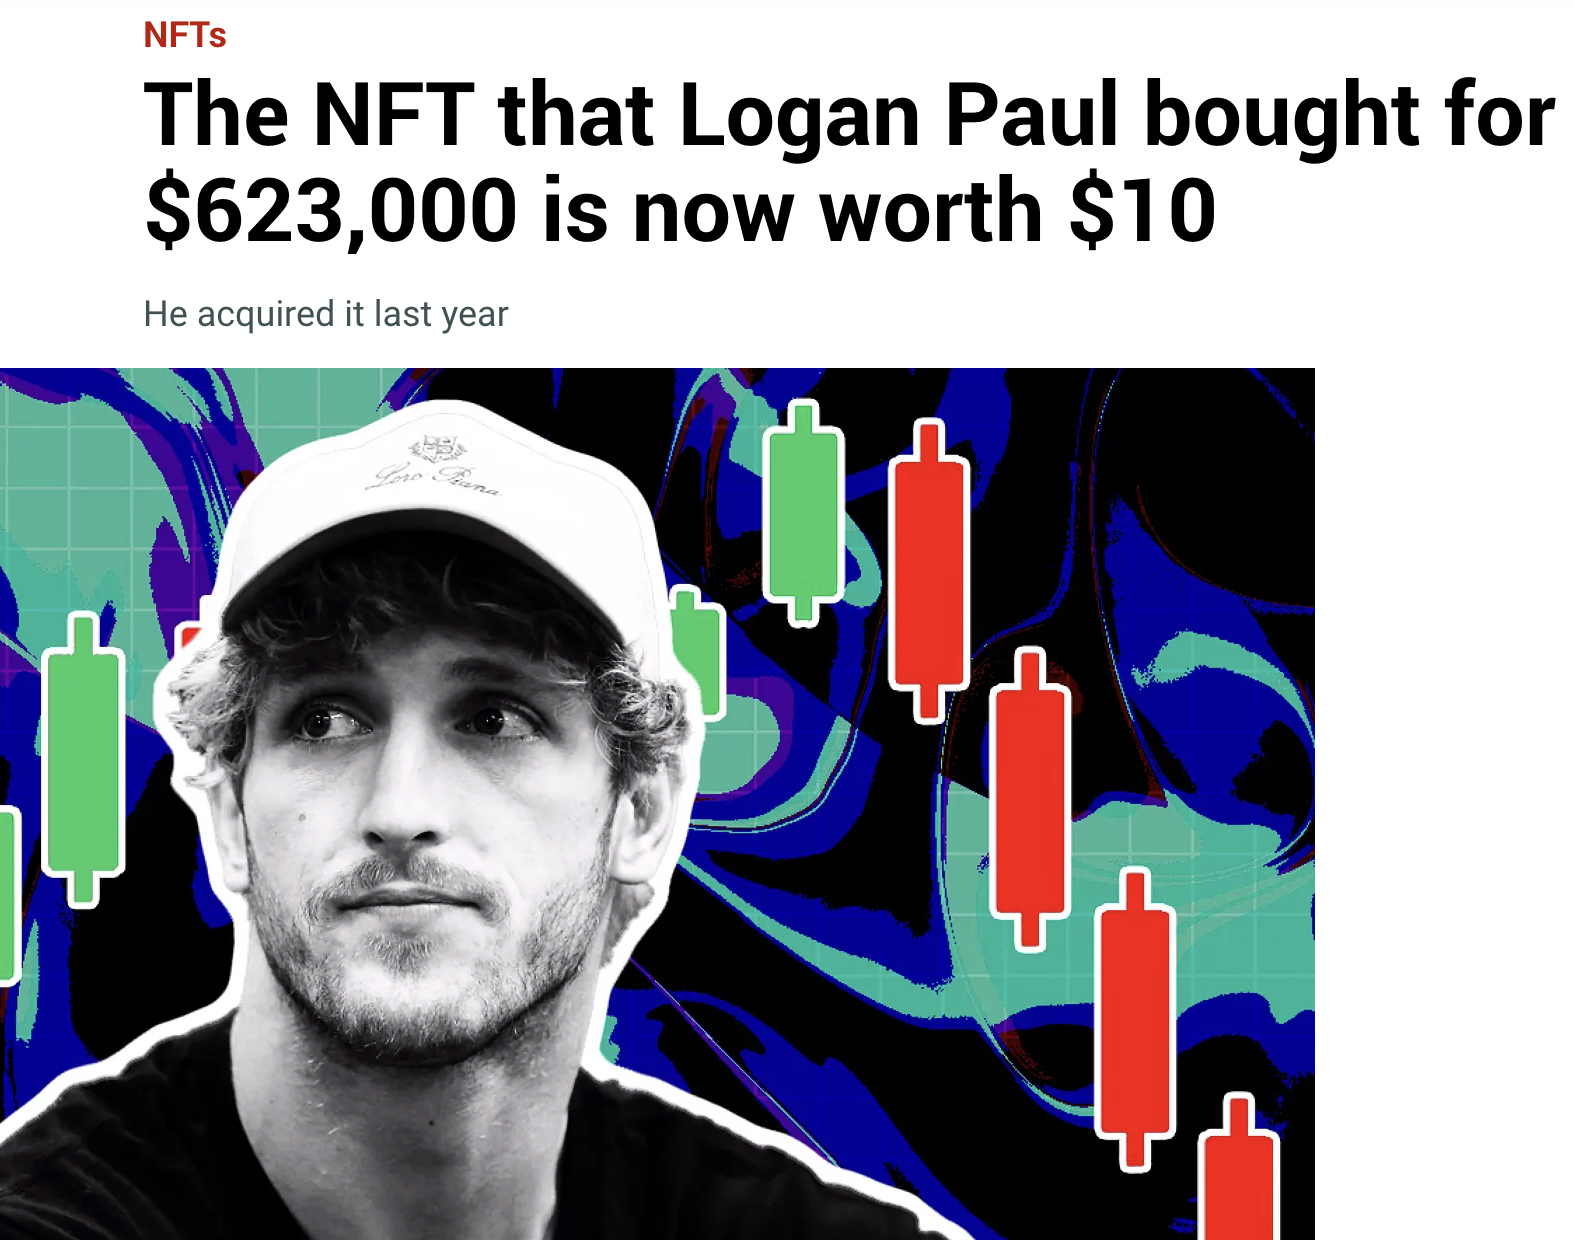 graphic design - Nfts The Nft that Logan Paul bought for $623,000 is now worth $10 He acquired it last year